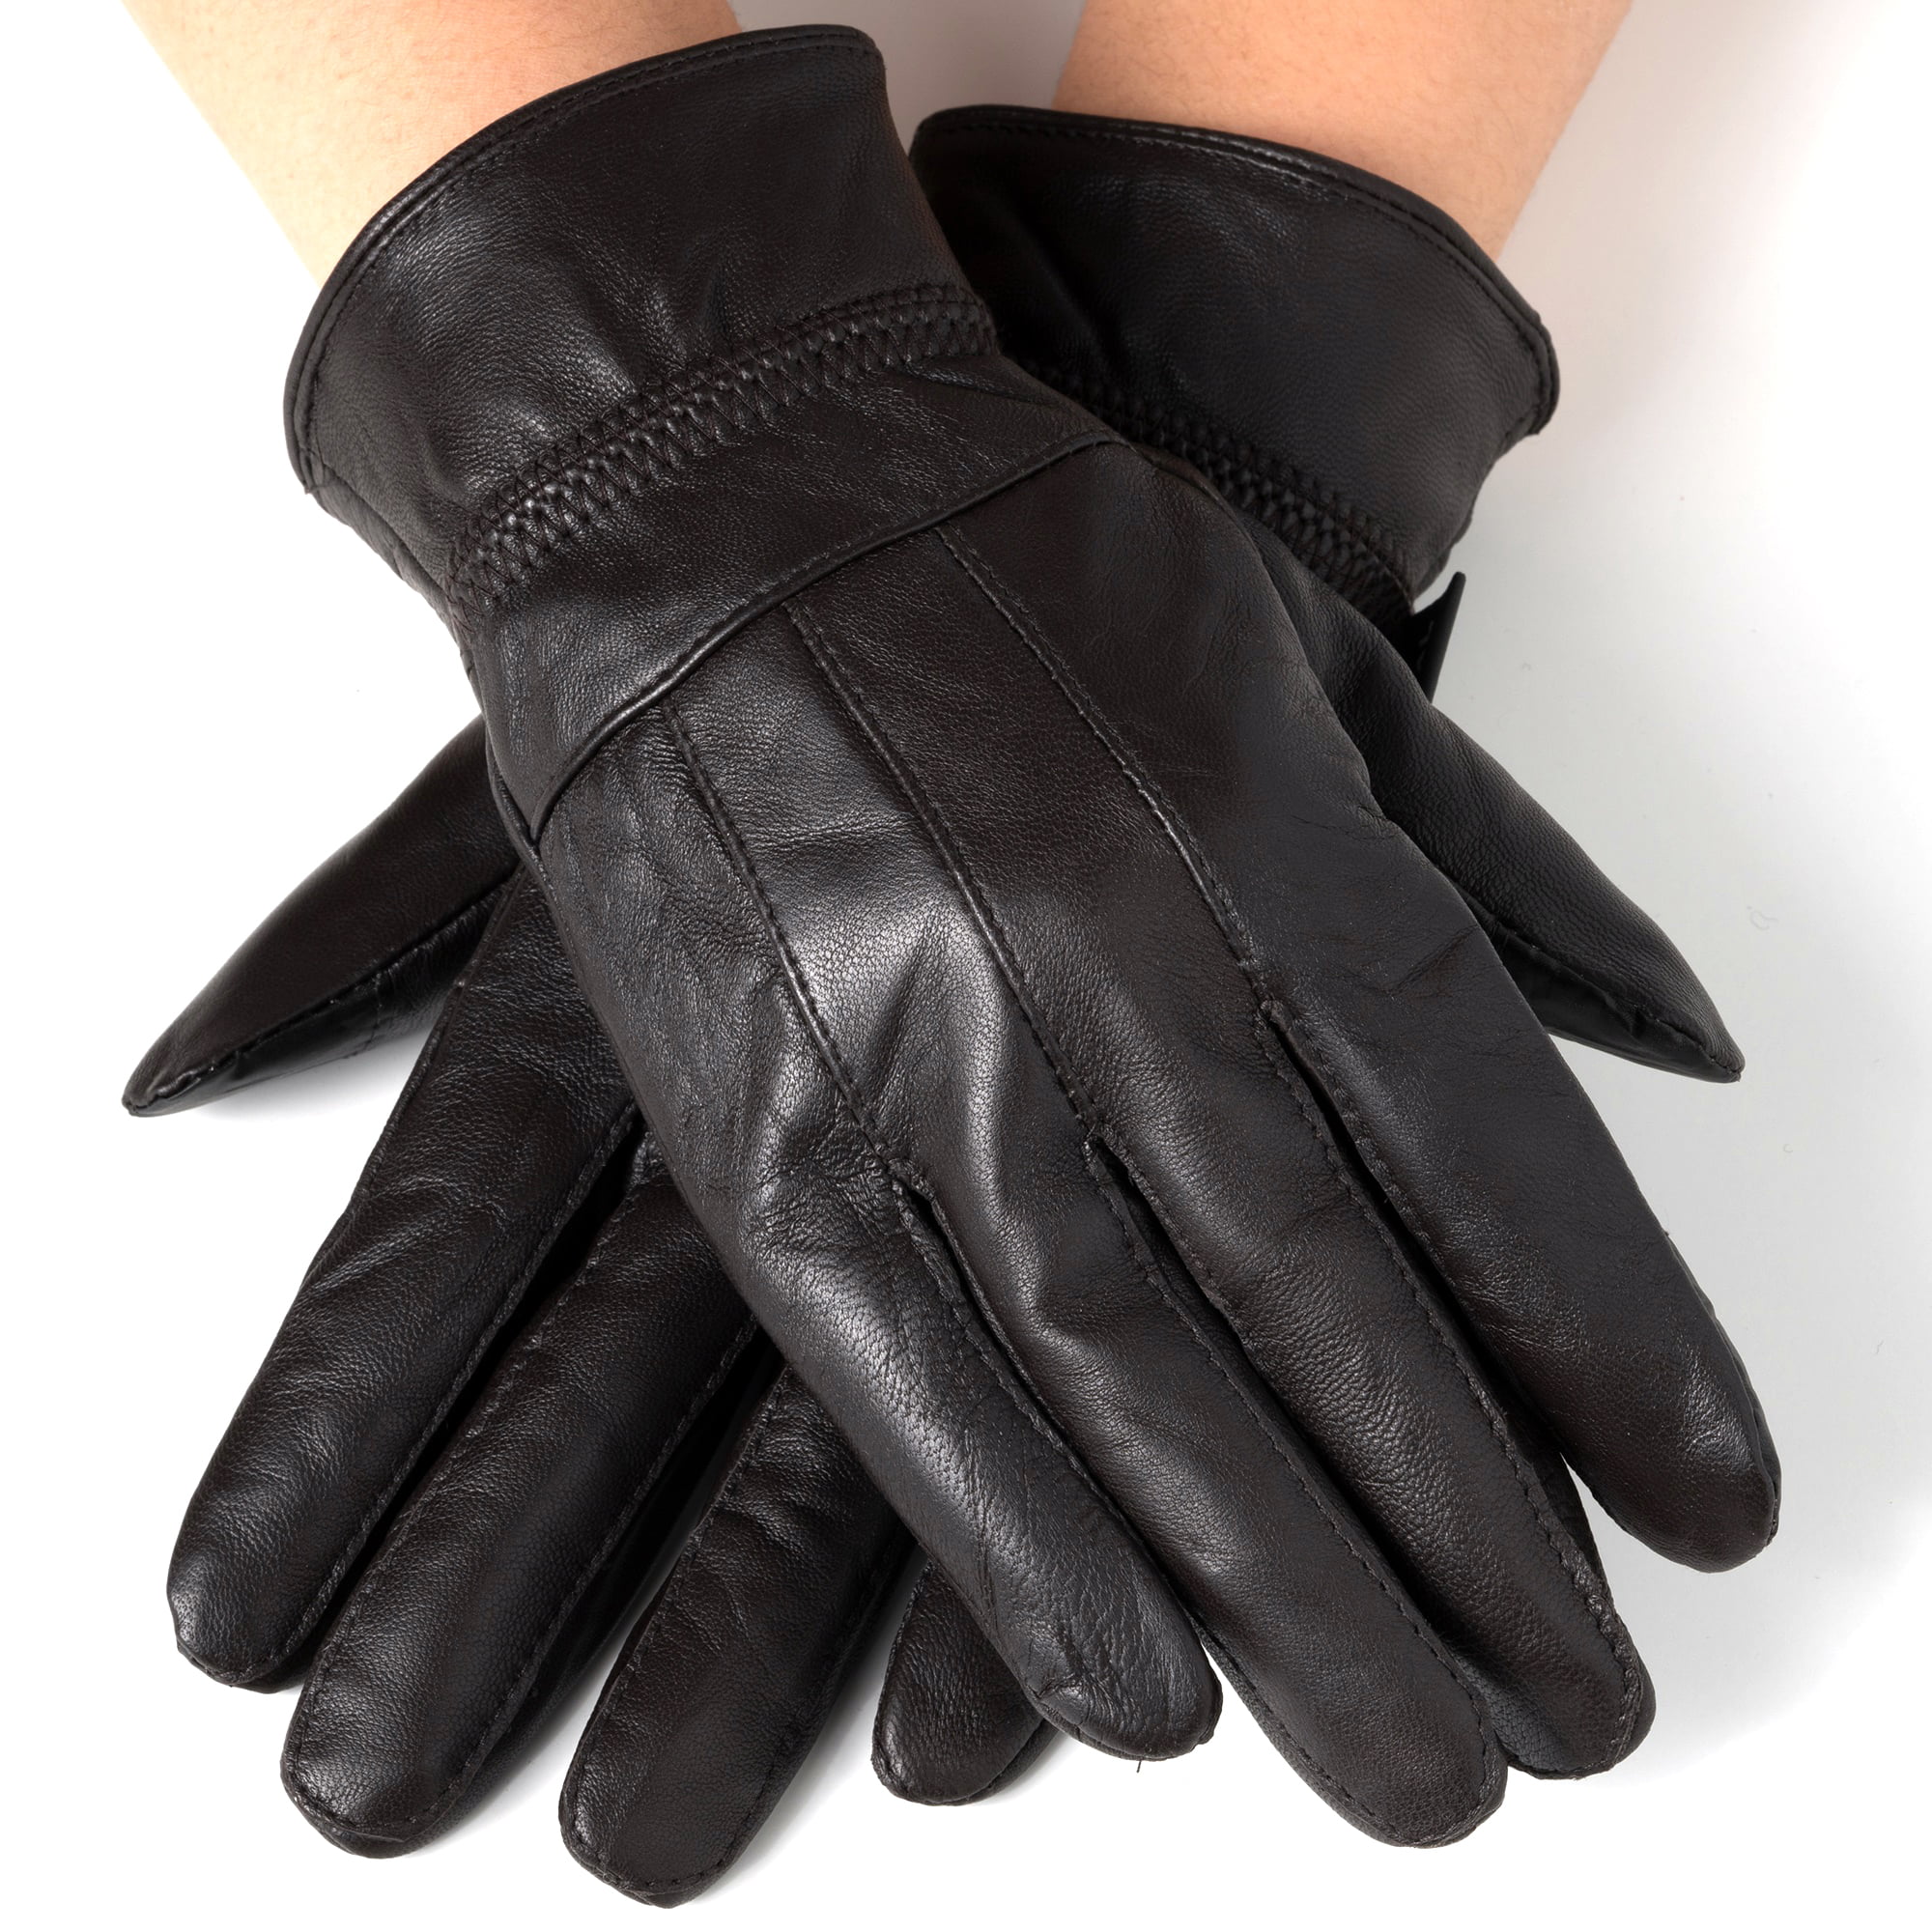 New Womens Texting Touchscreen Winter Gloves Faux Leather Small Black FREE SHIP 